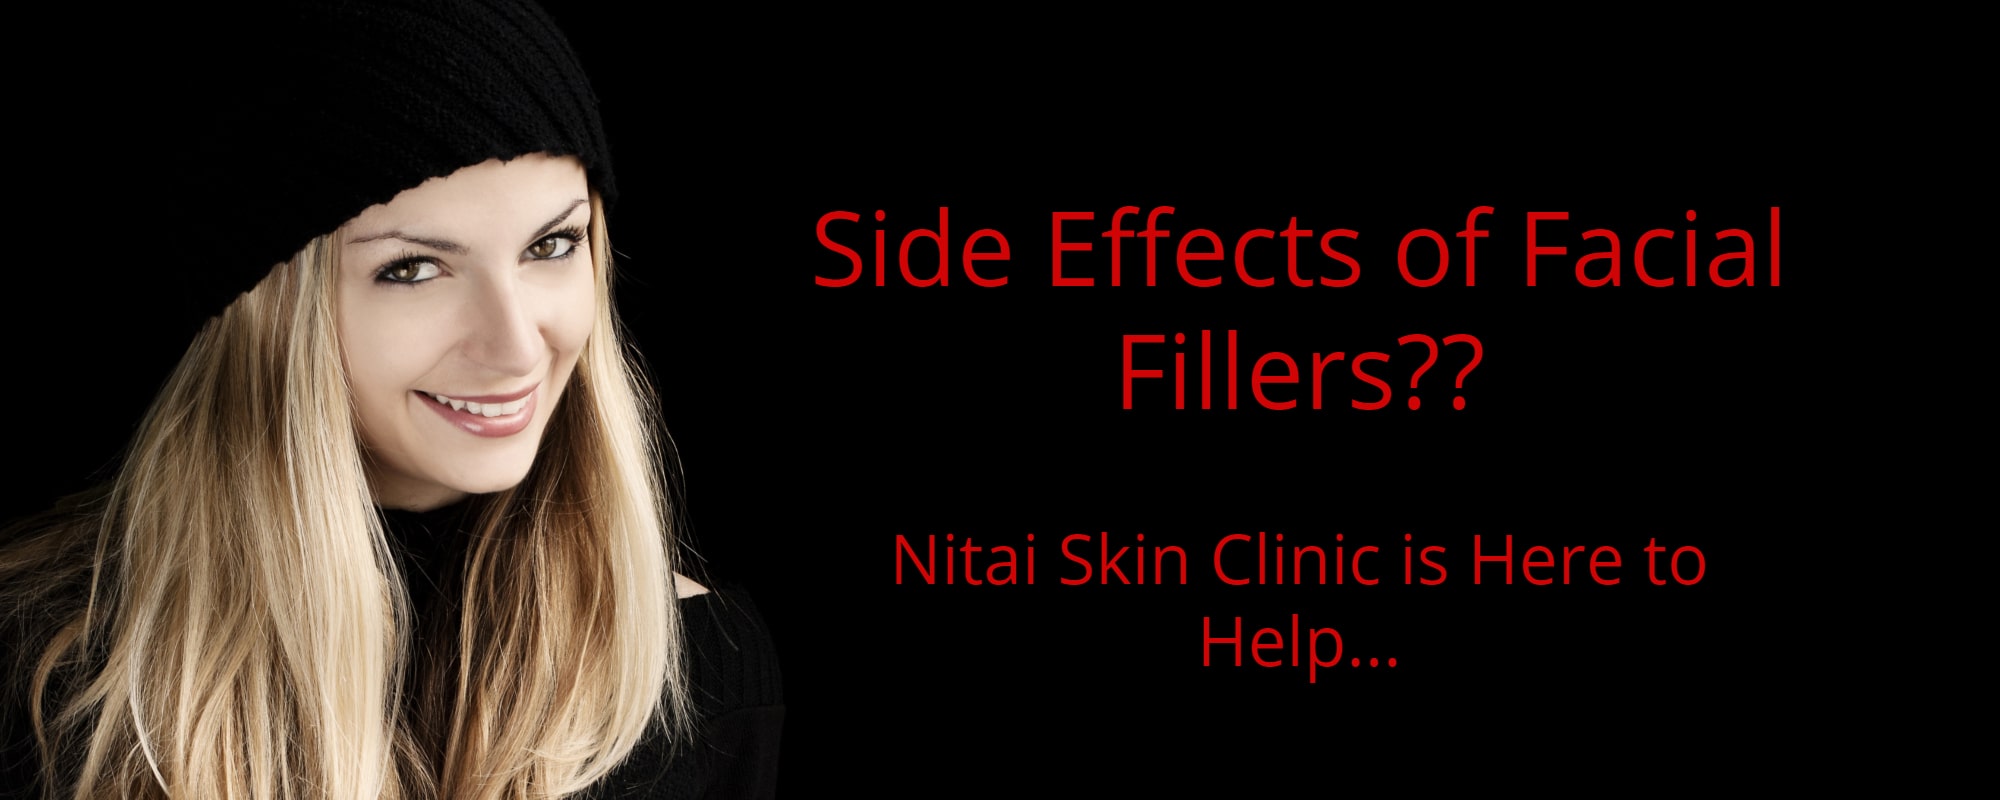 side effects of facial fillers